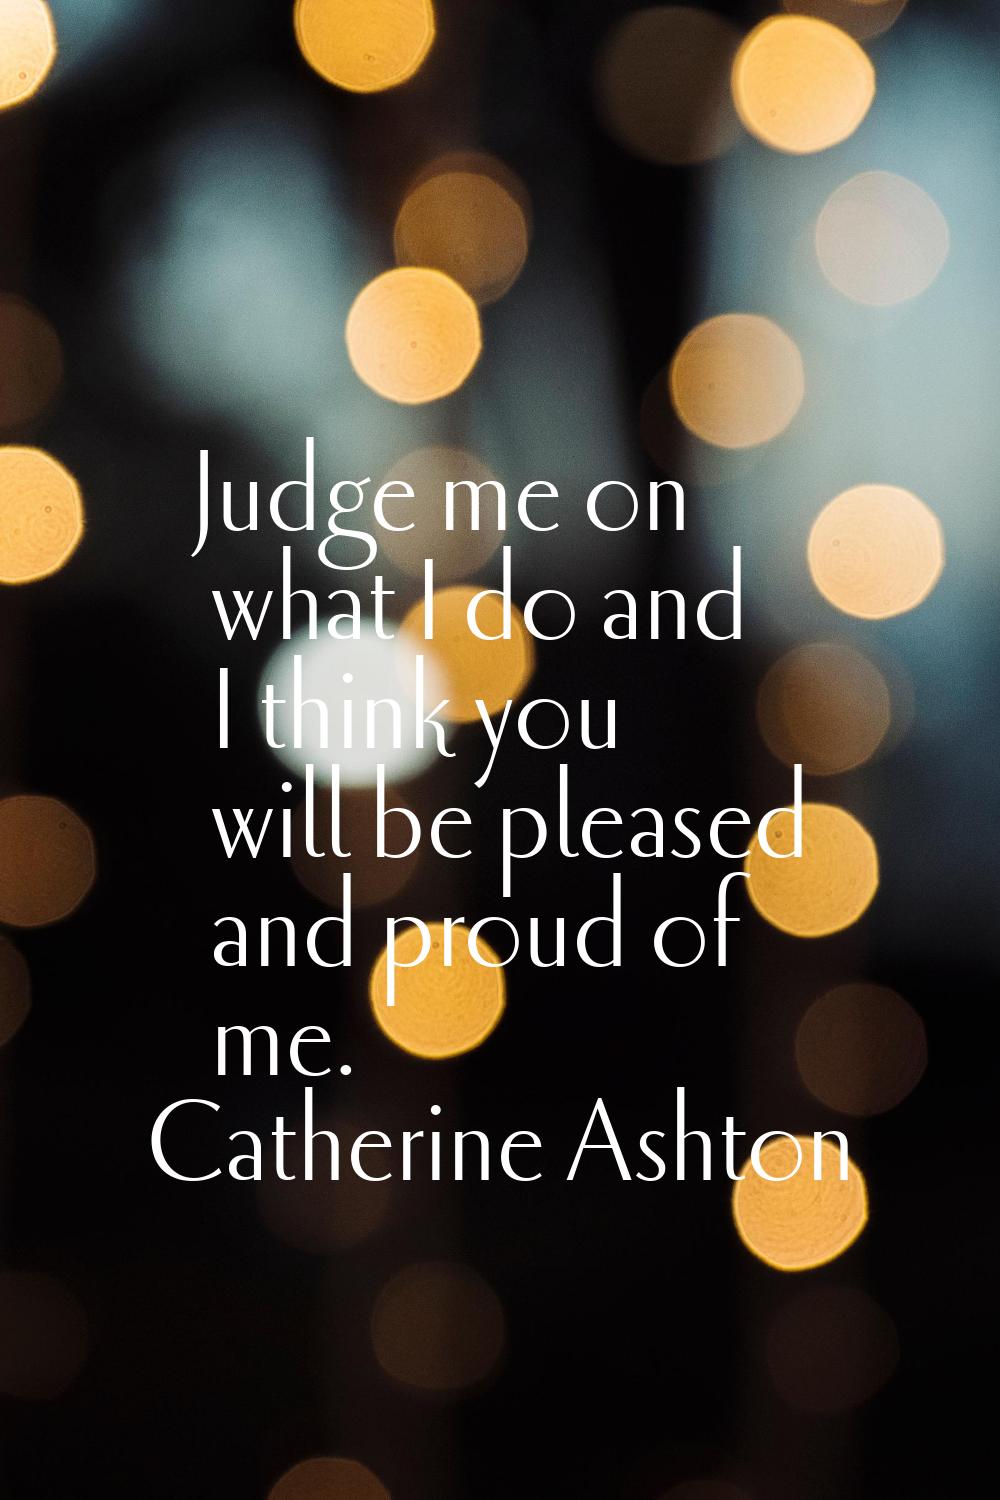 Judge me on what I do and I think you will be pleased and proud of me.